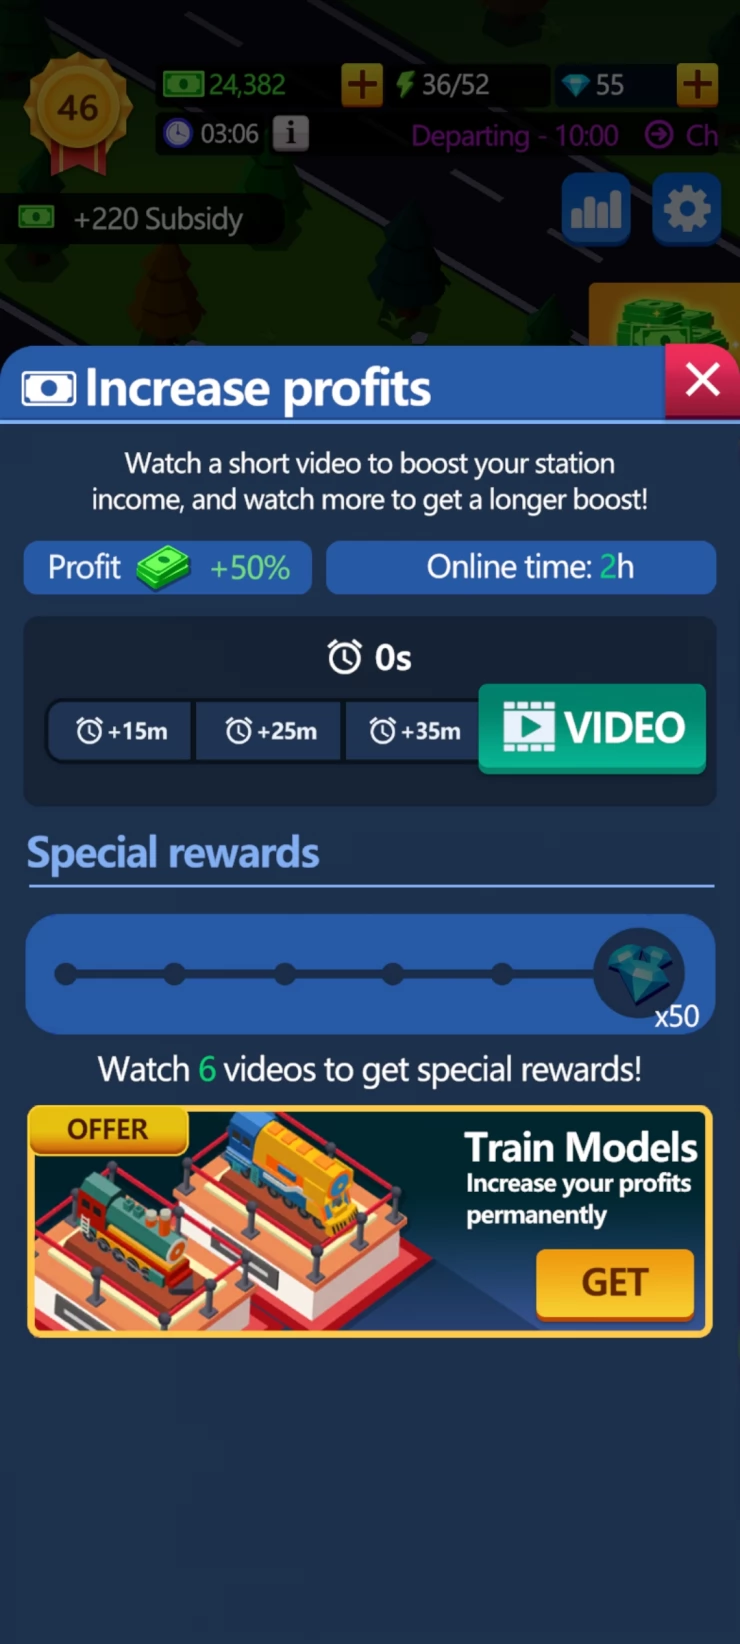 Watch Ads for free in-game cash and boosts